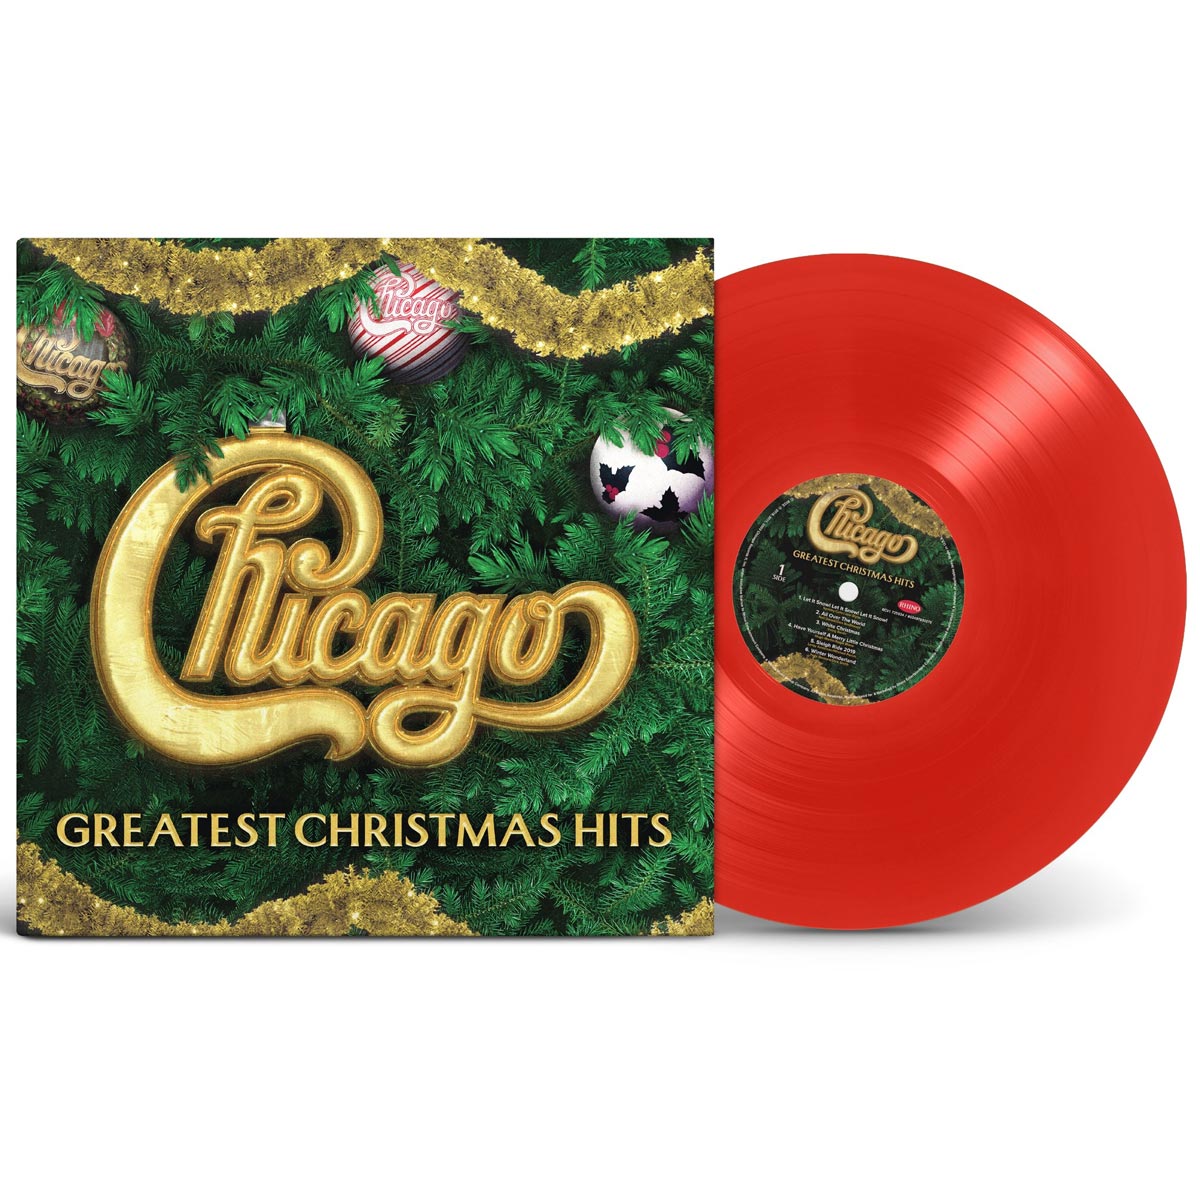 Chicago - Greatest Christmas Hits (Red Vinyl) - LP